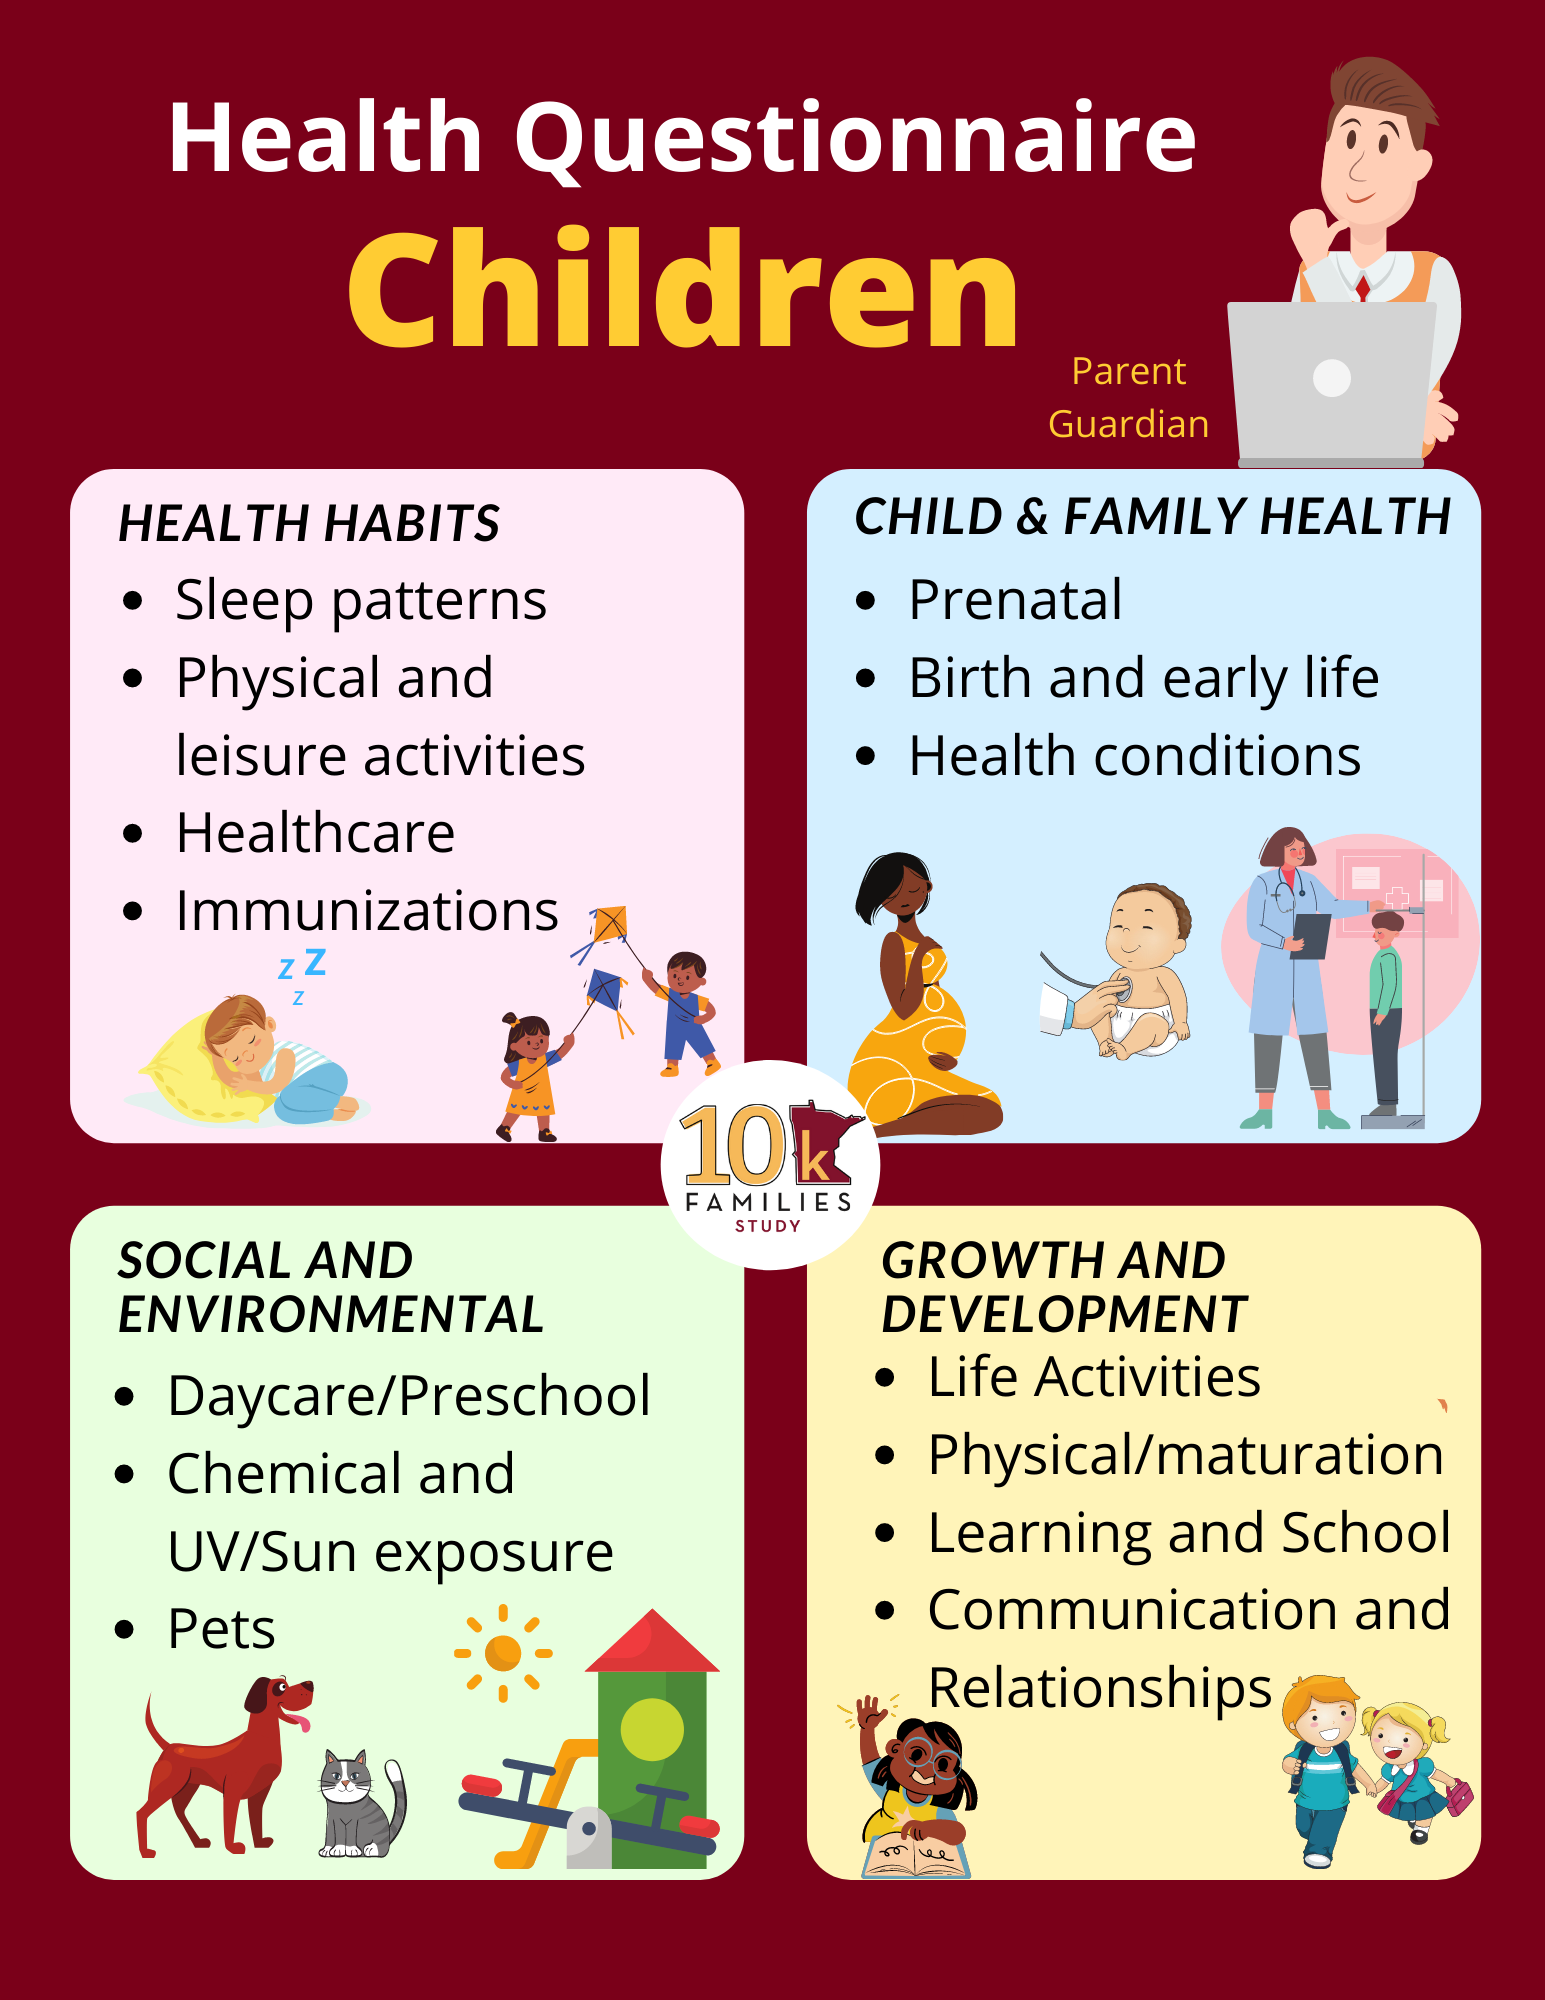 Infographic maroon background with 4 colorful sections: Health habits, Personal & Family Health, Environmental exposures and About you and your life